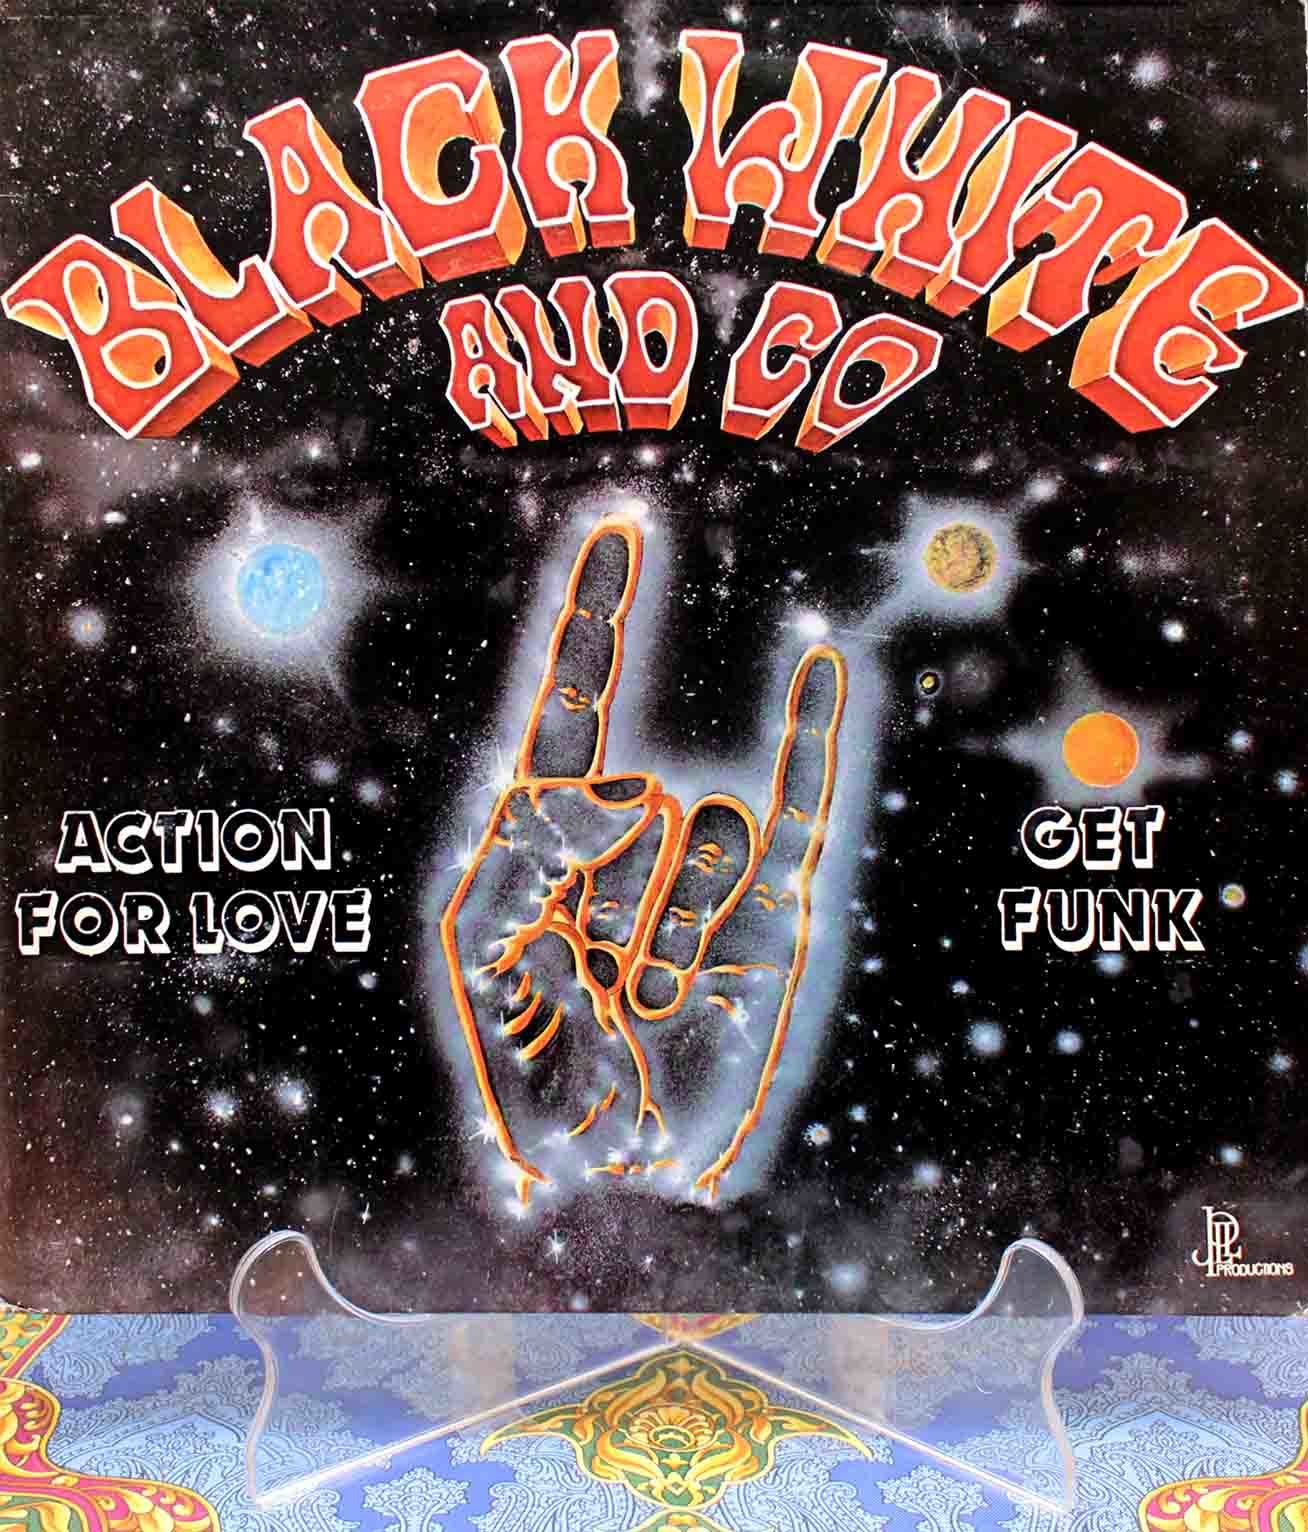 Black White And Co ‎– Action For Love France 01